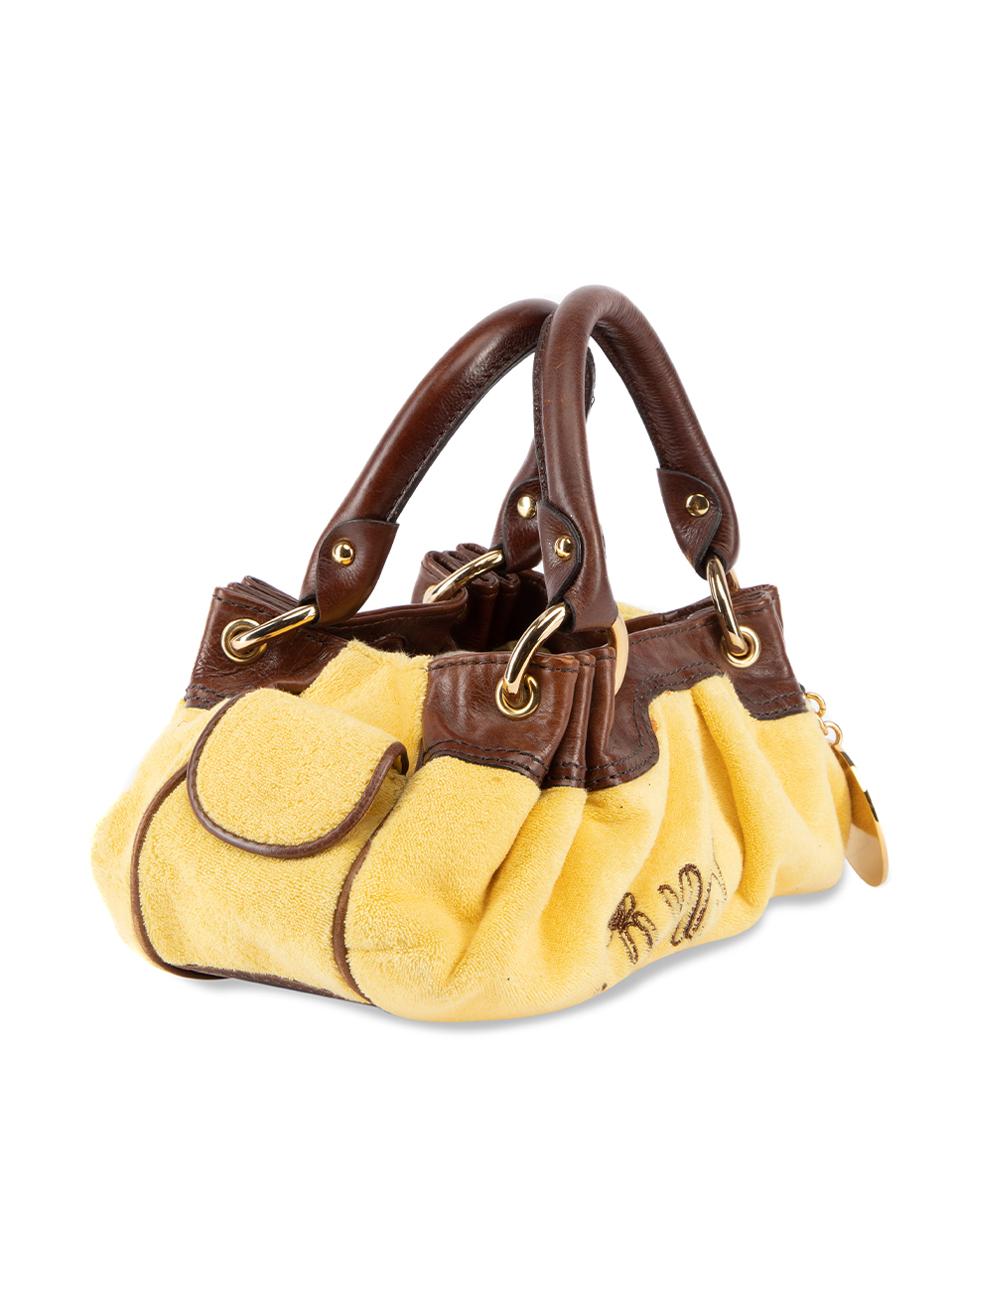 CONDITION is Very good. Minimal wear to bag is evident. Minimal wear to the exterior towelling faabric wheee stains and scuffs to the leather bag handles can be seen on this used Juicy Couture designer resale item. Details Yellow and brown Cotton